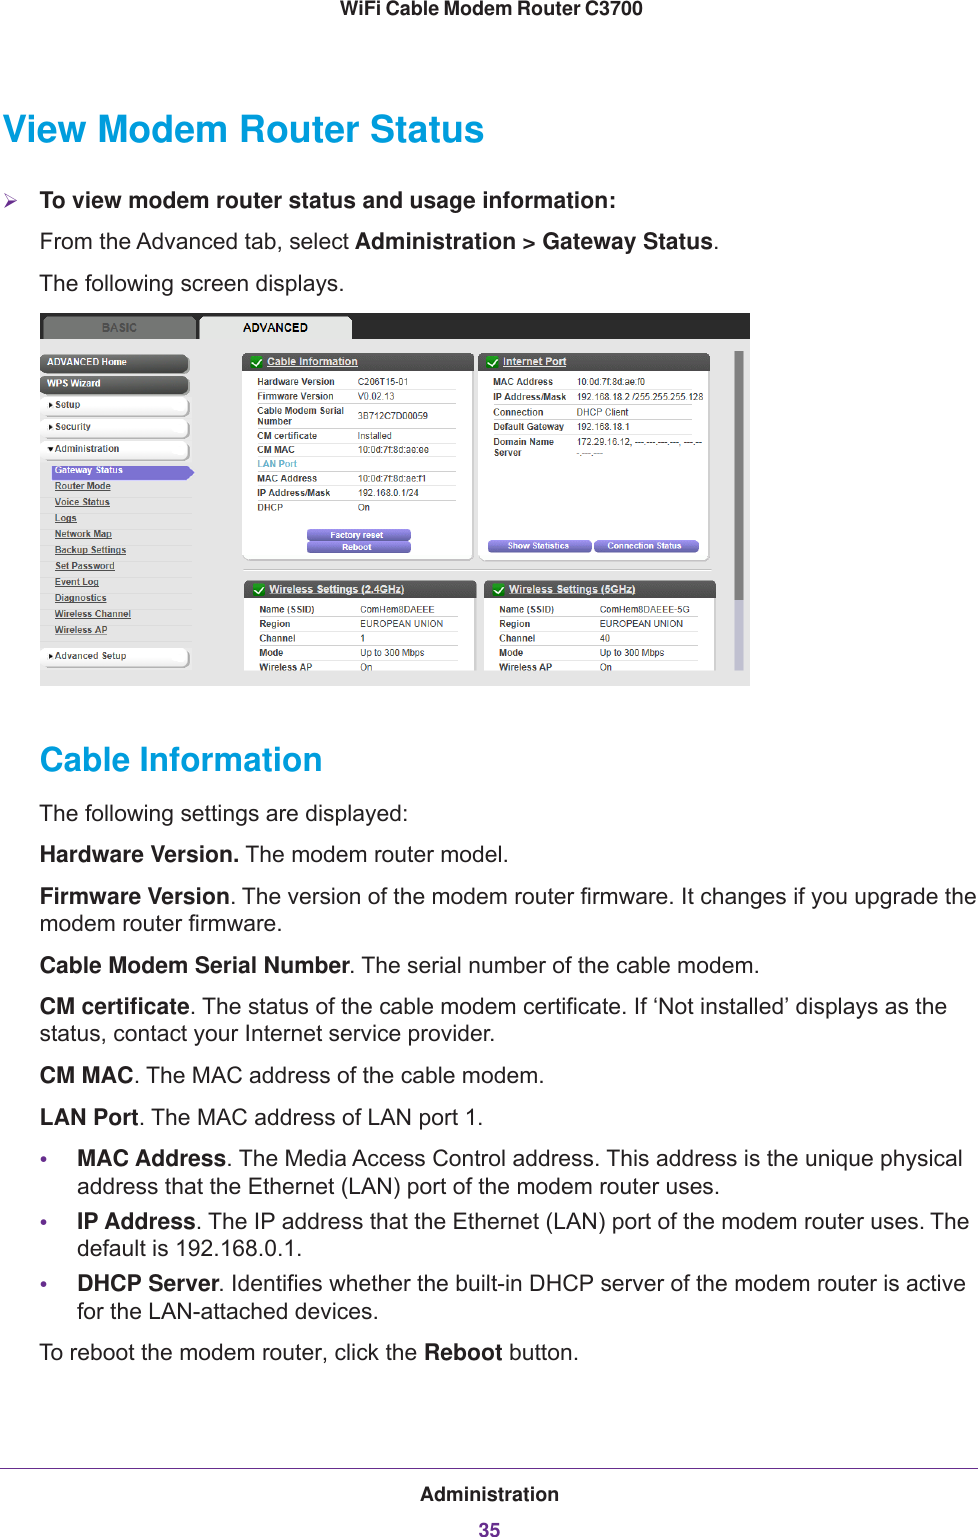 Administration35 WiFi Cable Modem Router C3700View Modem Router StatusTo view modem router status and usage information:From the Advanced tab, select Administration &gt; Gateway Status.The following screen displays. Cable InformationThe following settings are displayed:Hardware Version. The modem router model.Firmware Version. The version of the modem router firmware. It changes if you upgrade the modem router firmware.Cable Modem Serial Number. The serial number of the cable modem.CM certificate. The status of the cable modem certificate. If ‘Not installed’ displays as the status, contact your Internet service provider.CM MAC. The MAC address of the cable modem.LAN Port. The MAC address of LAN port 1.•MAC Address. The Media Access Control address. This address is the unique physical address that the Ethernet (LAN) port of the modem router uses. •IP Address. The IP address that the Ethernet (LAN) port of the modem router uses. The default is 192.168.0.1.•DHCP Server. Identifies whether the built-in DHCP server of the modem router is active for the LAN-attached devices.To reboot the modem router, click the Reboot button.